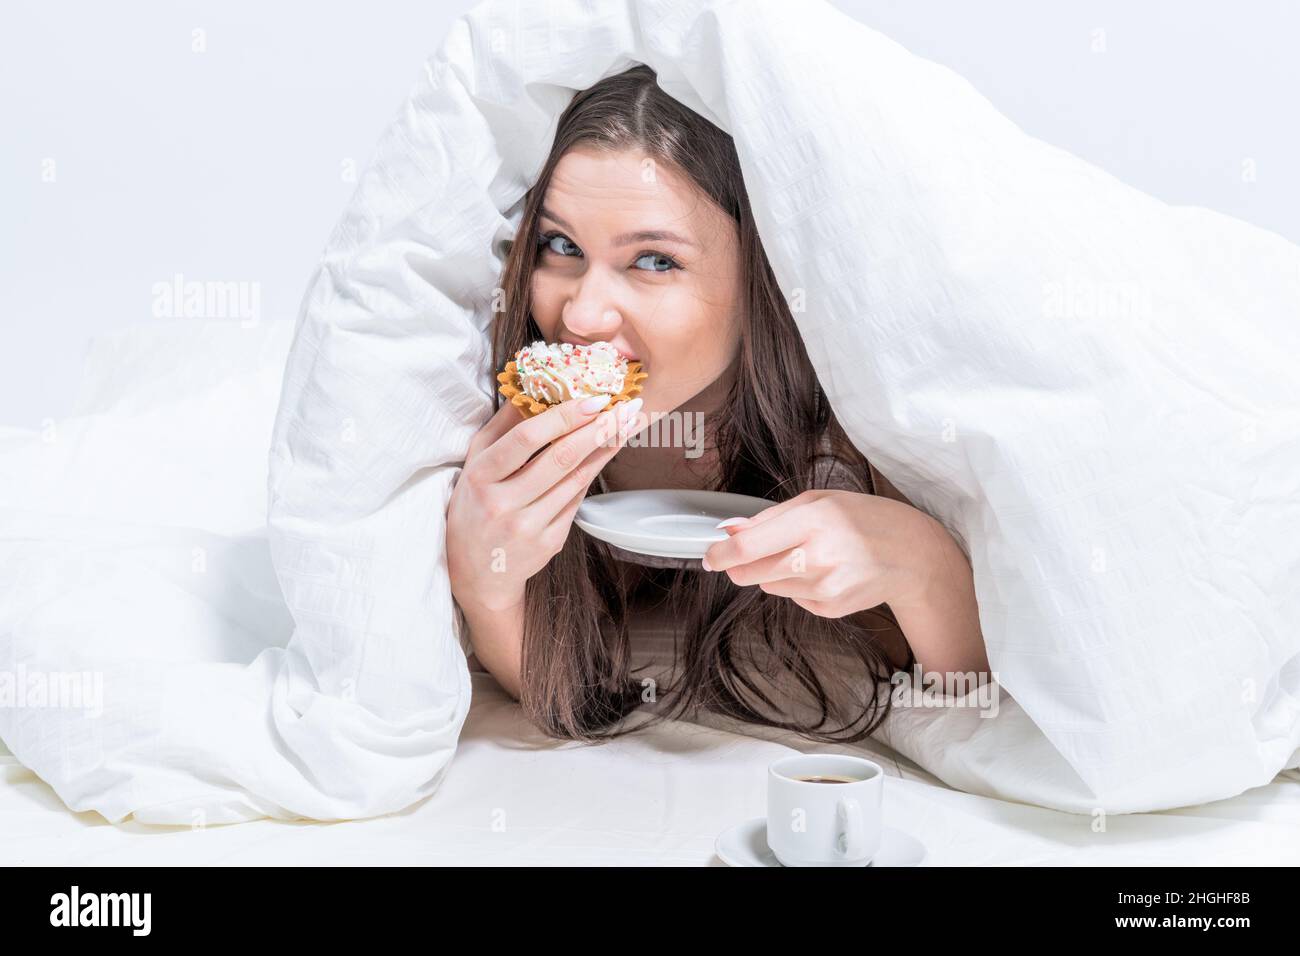 Cute woman is eating a cupcake while lying on the bed, under the covers. Breakfast in bed. Dessert. Calories. Stock Photo